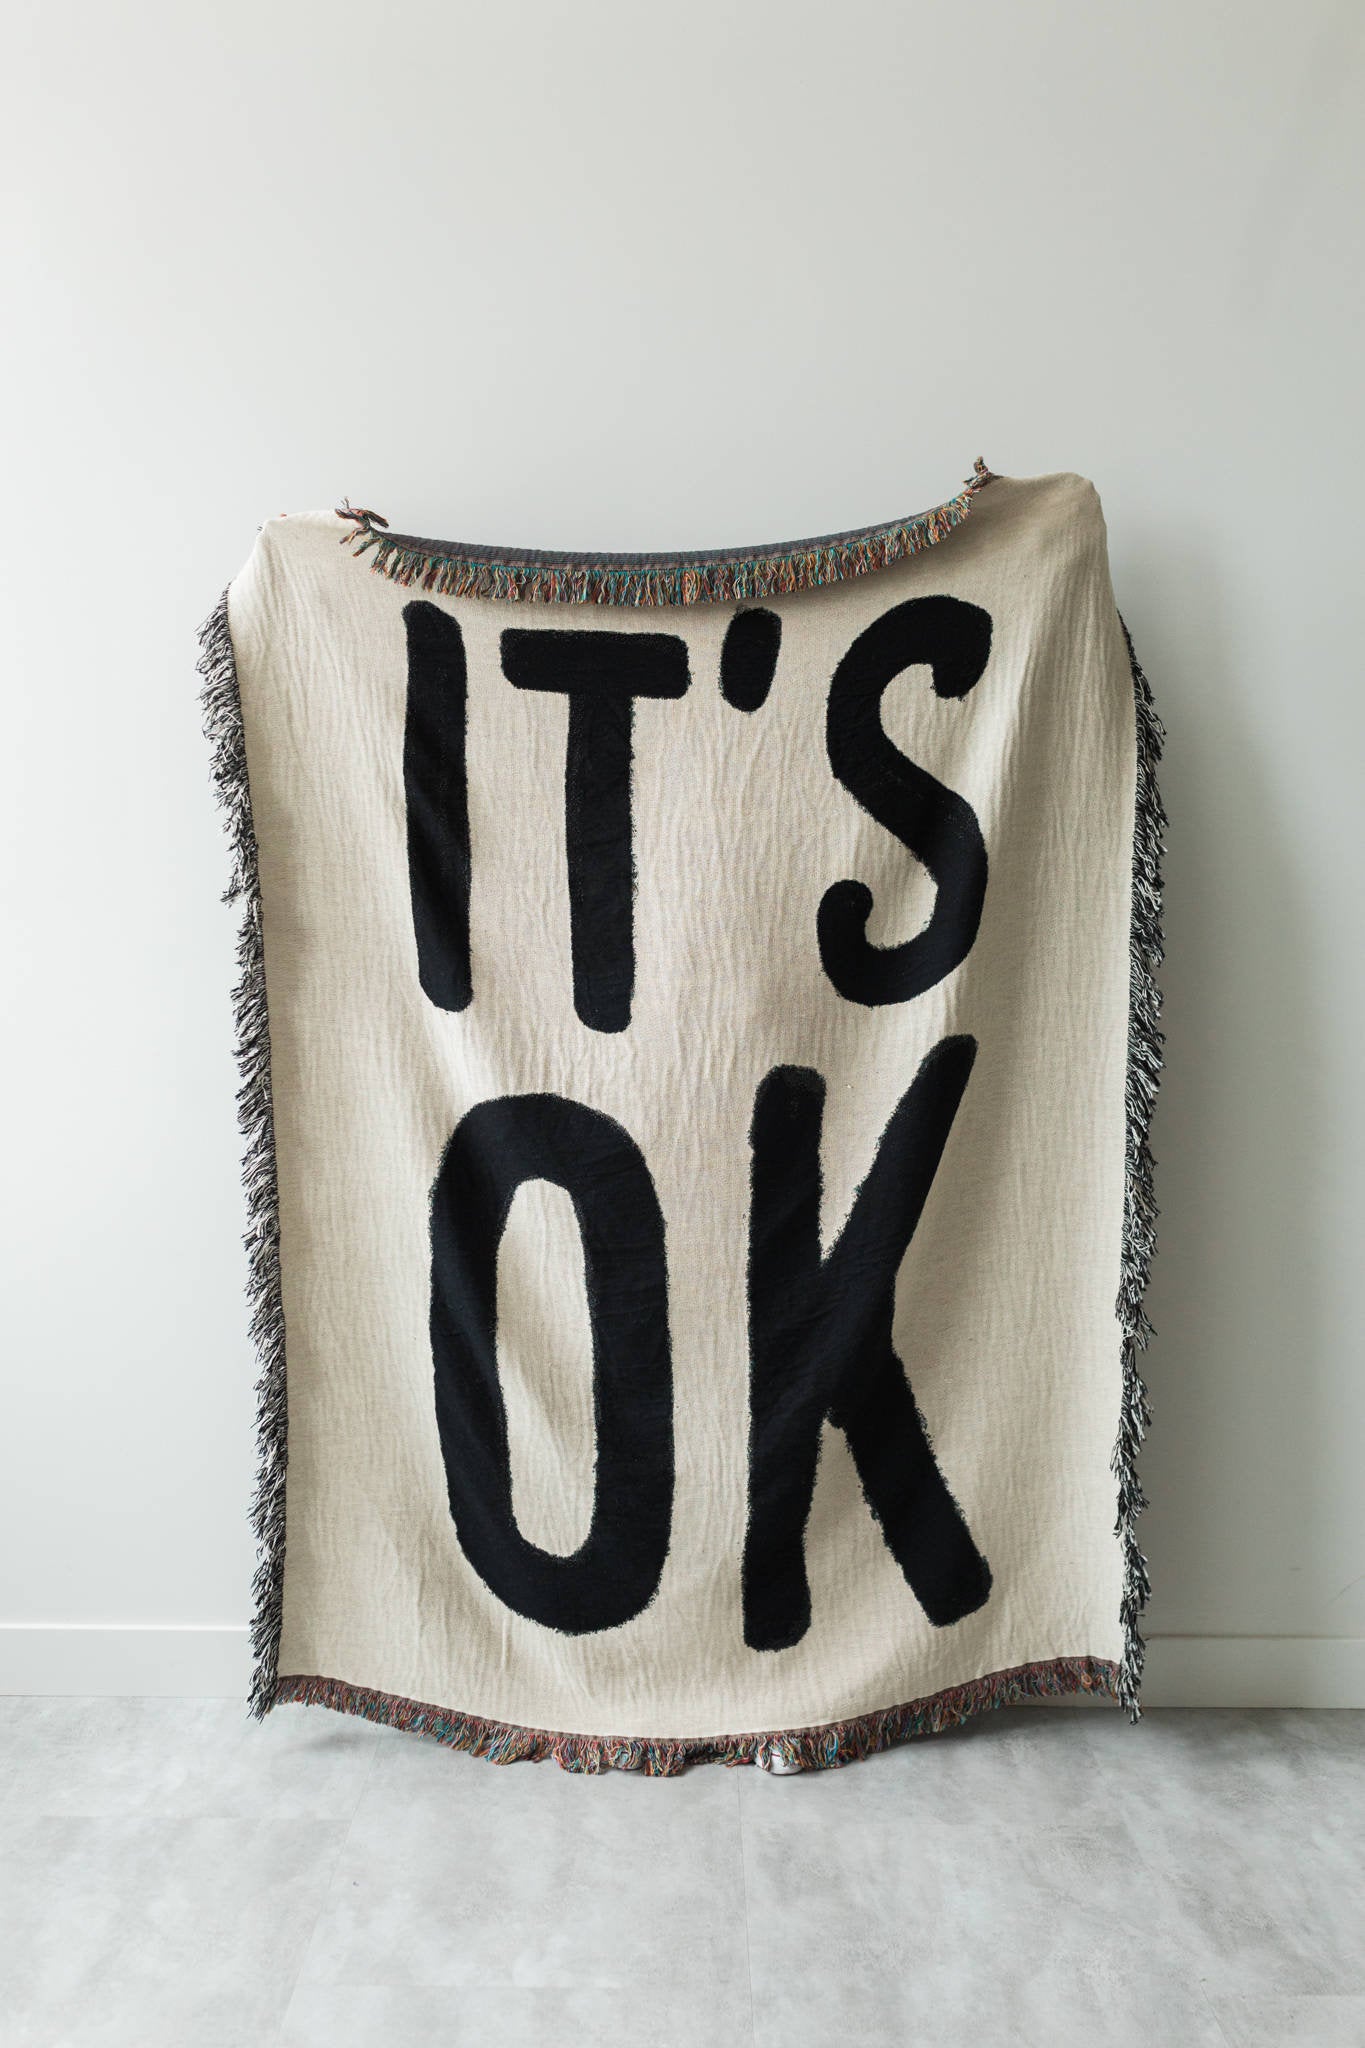 white and black blanket that says "it's ok"